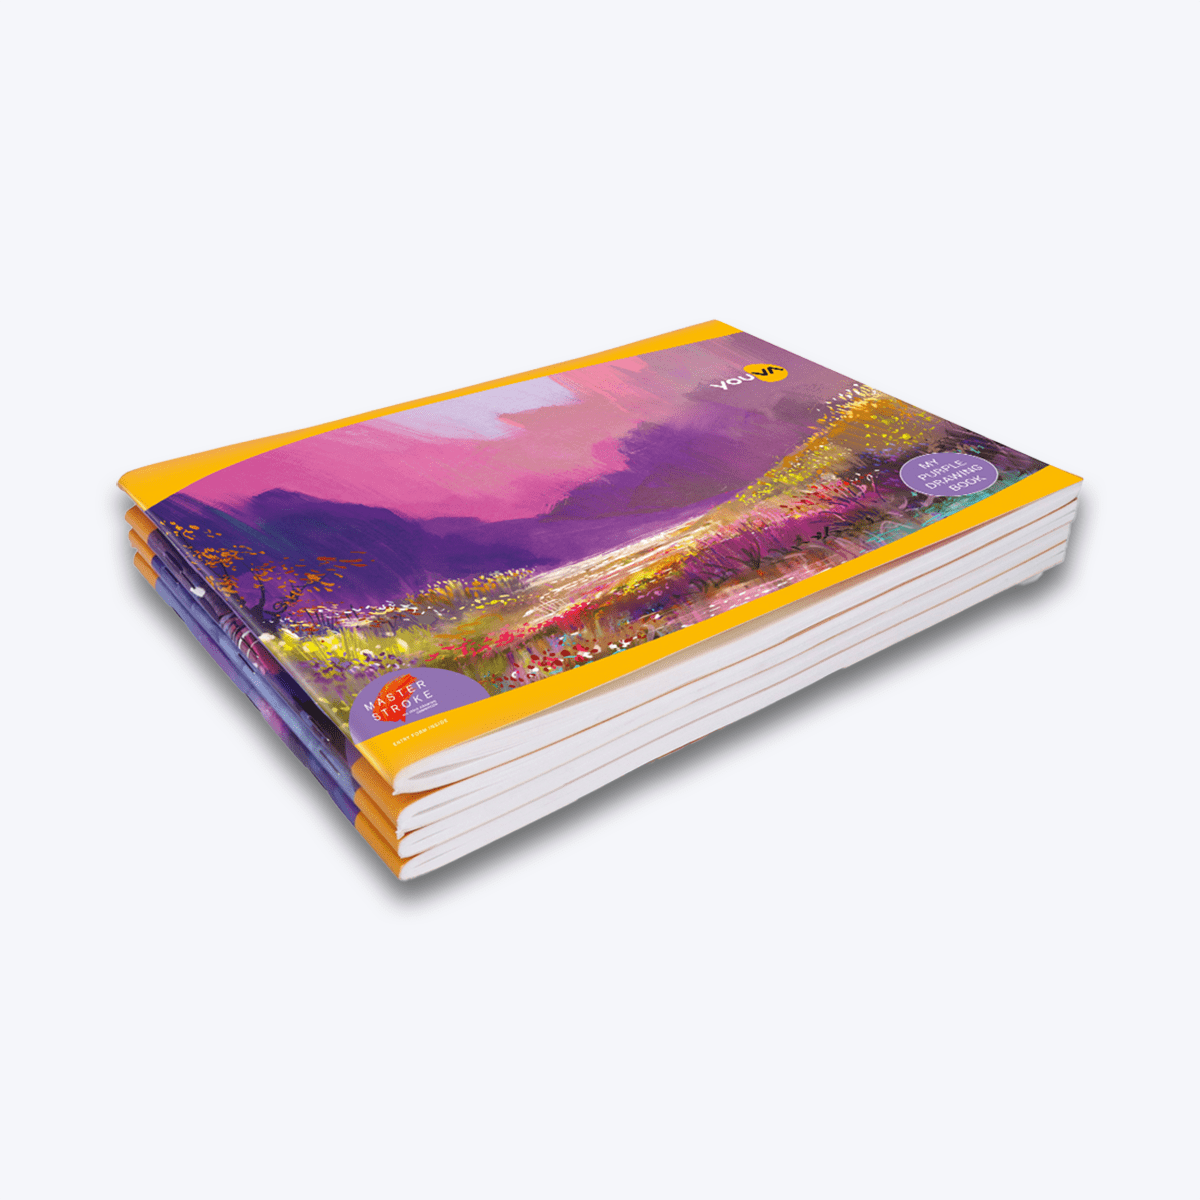 Navneet Youva | Purple Drawing Book for students and budding artists | Small Size | A4 size 21 cm x 29.7 cm | 100 Pages| Pack of 2